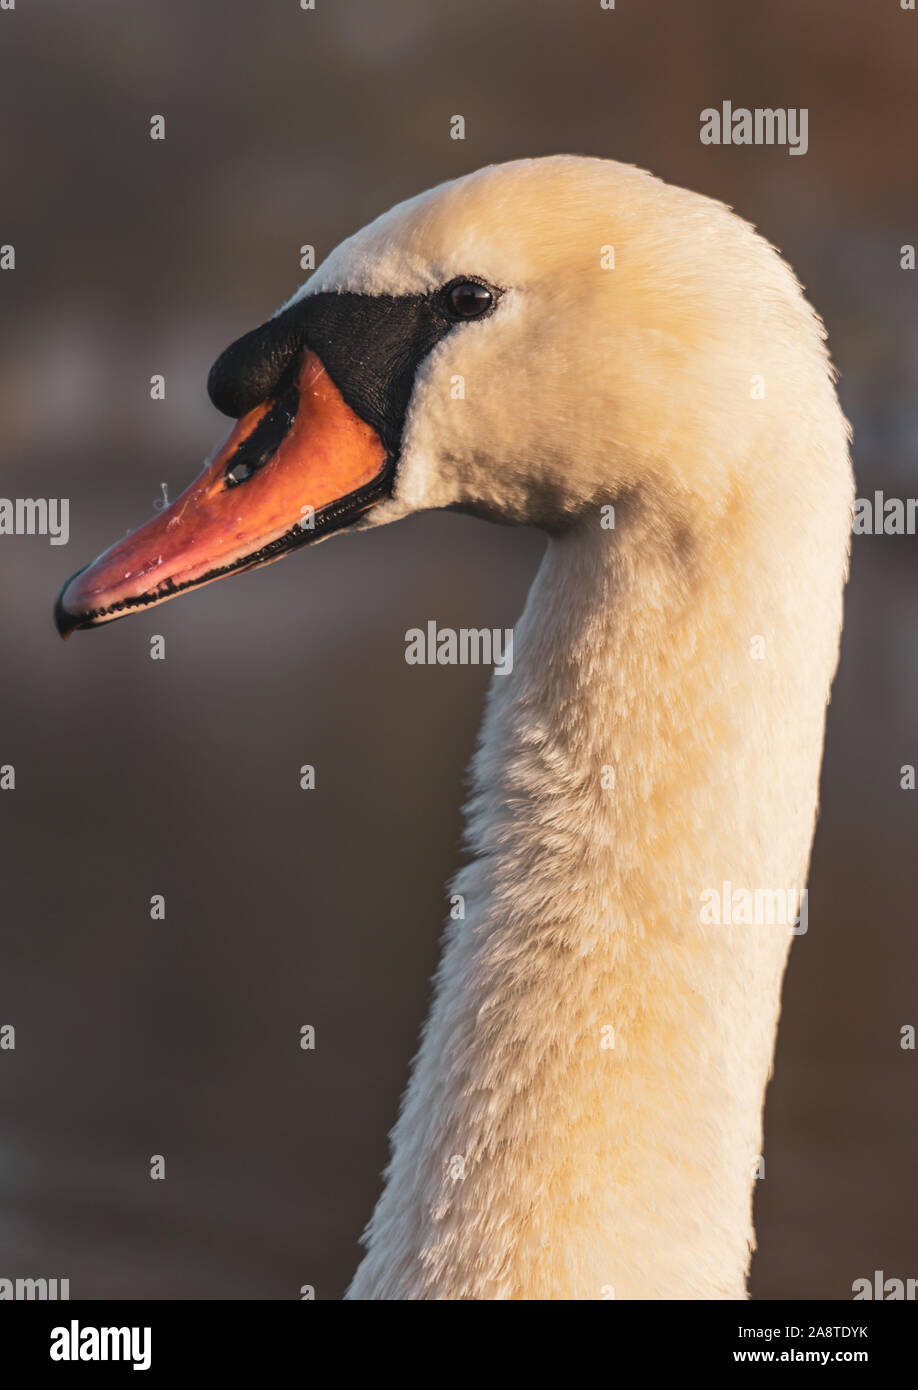 A Swan at Bushy Park, London England. Taken a cold and misty autumn morning Stock Photo